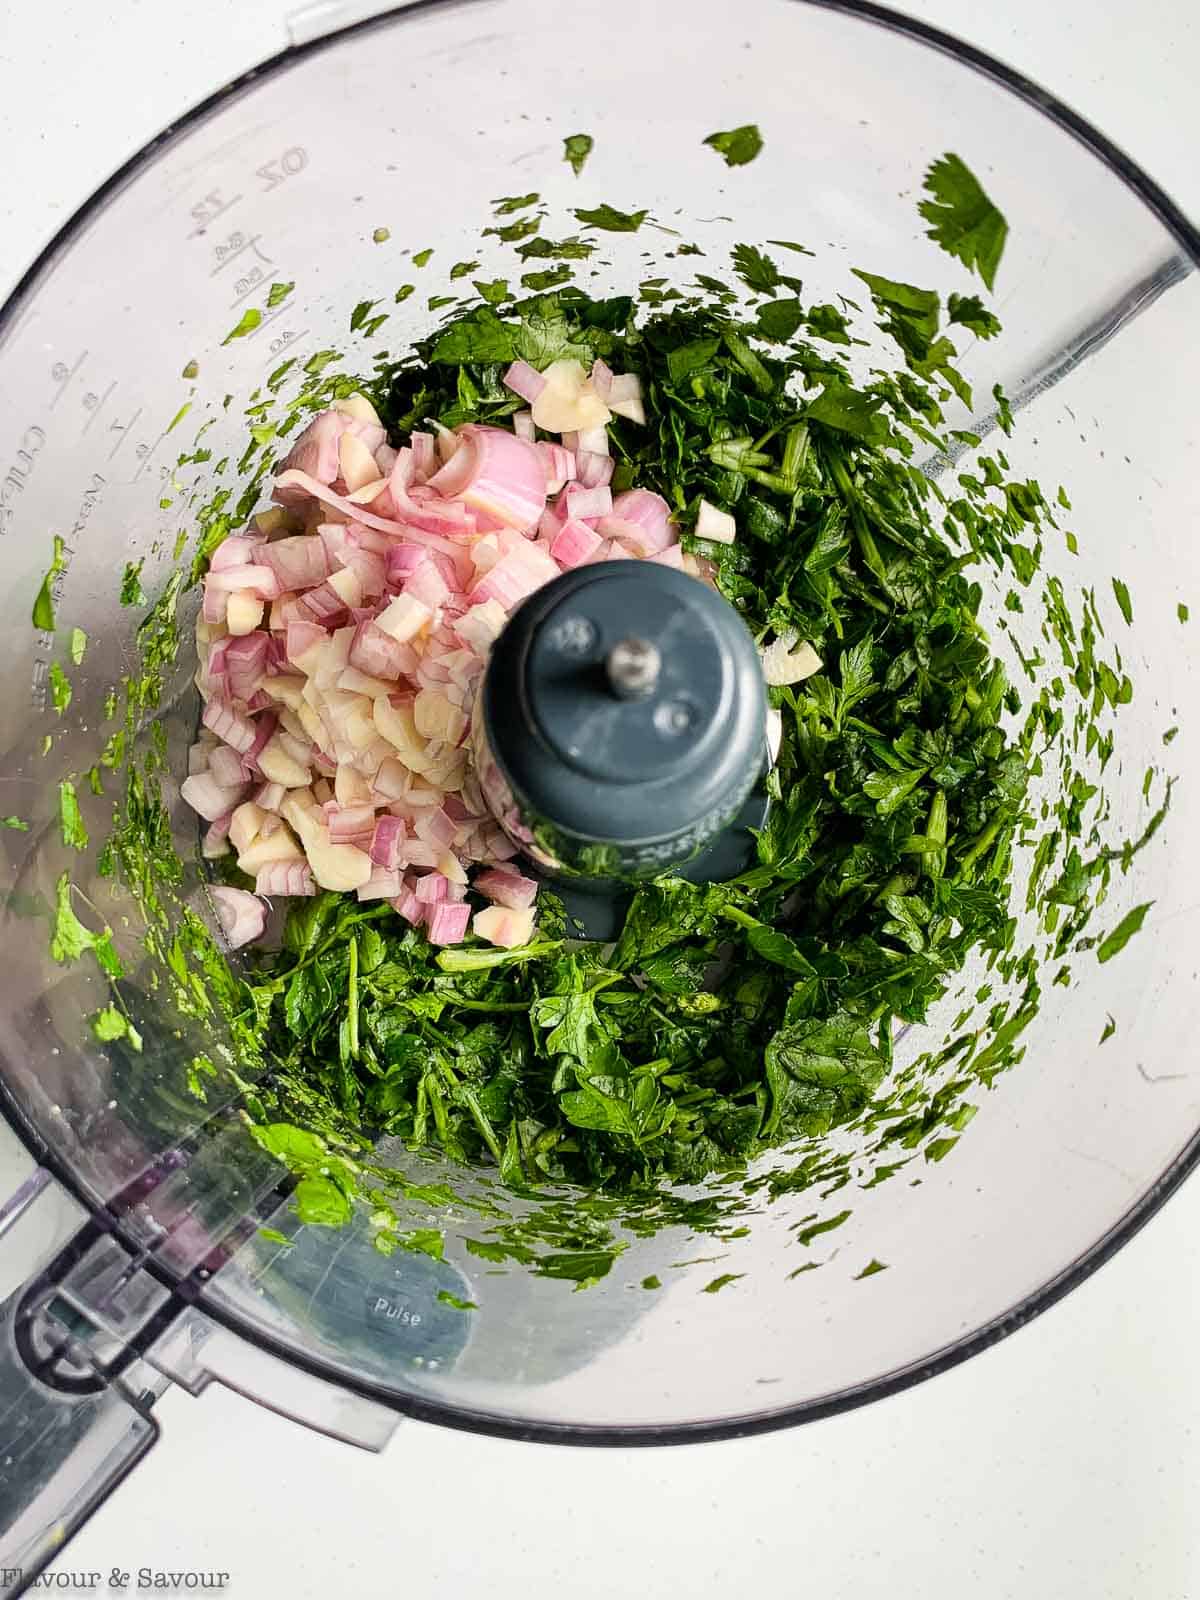 Chimichurri sauce ingredients in a food processor bowl.